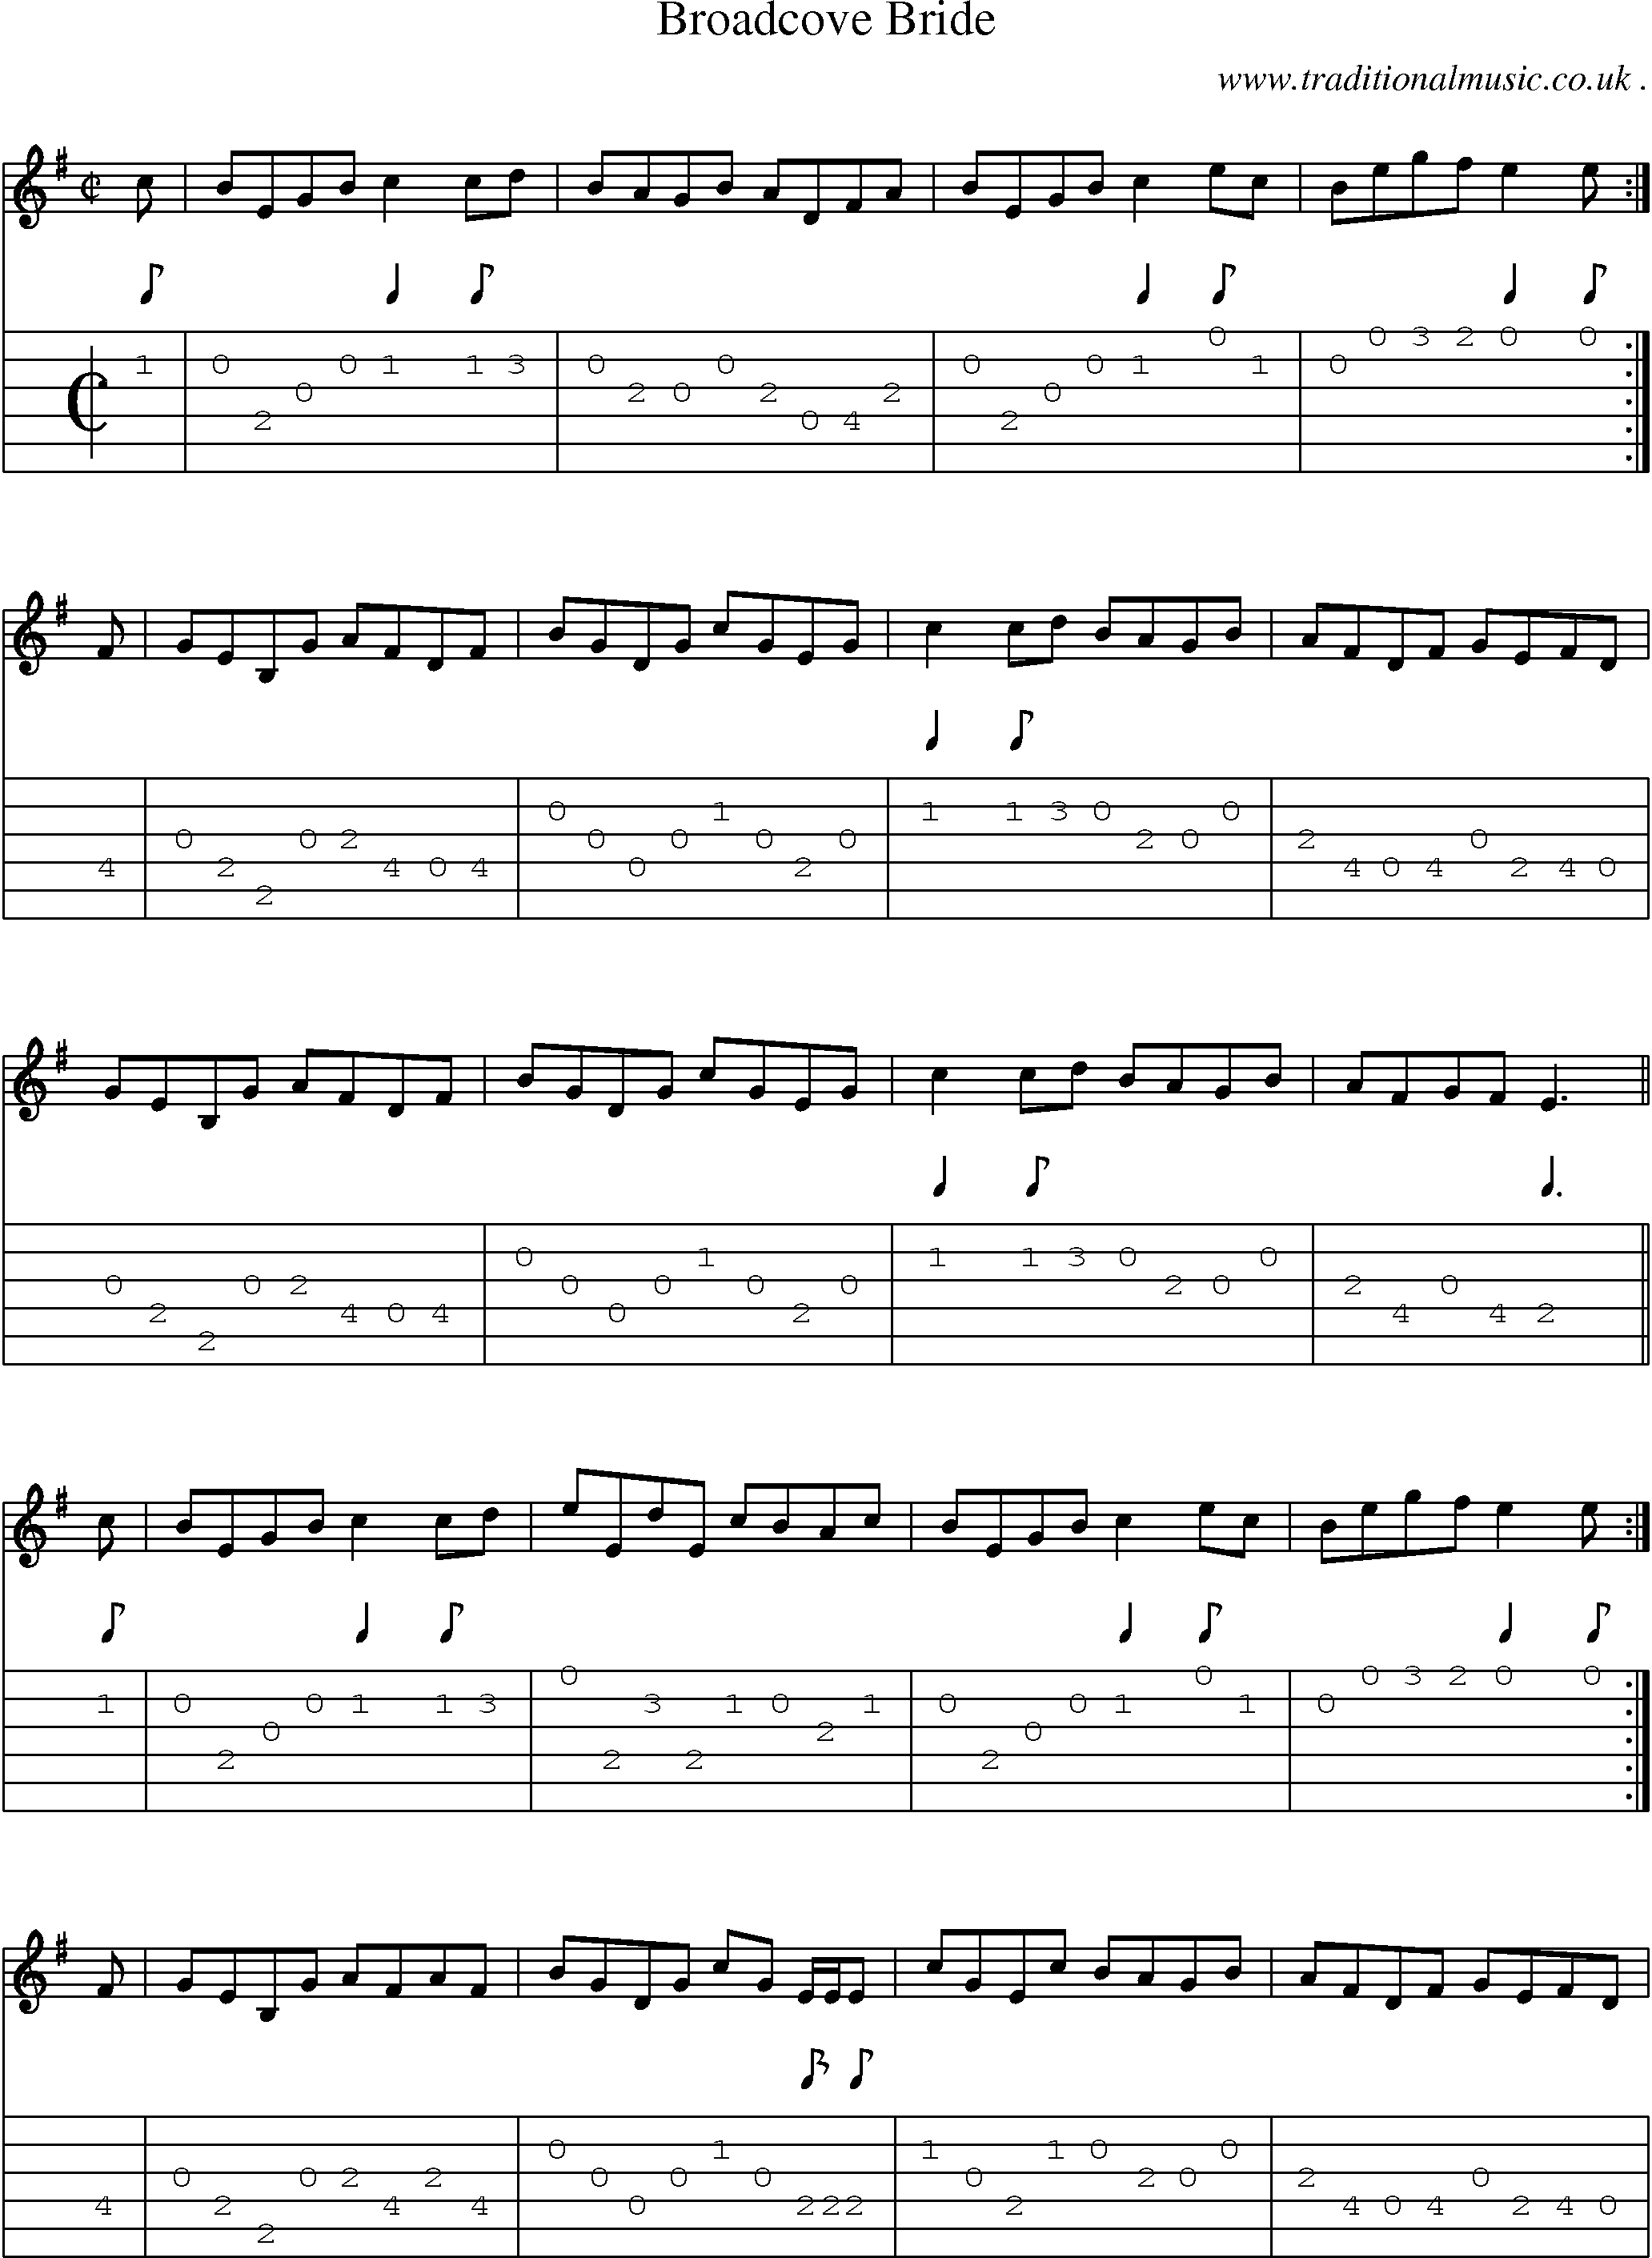 Sheet-Music and Guitar Tabs for Broadcove Bride